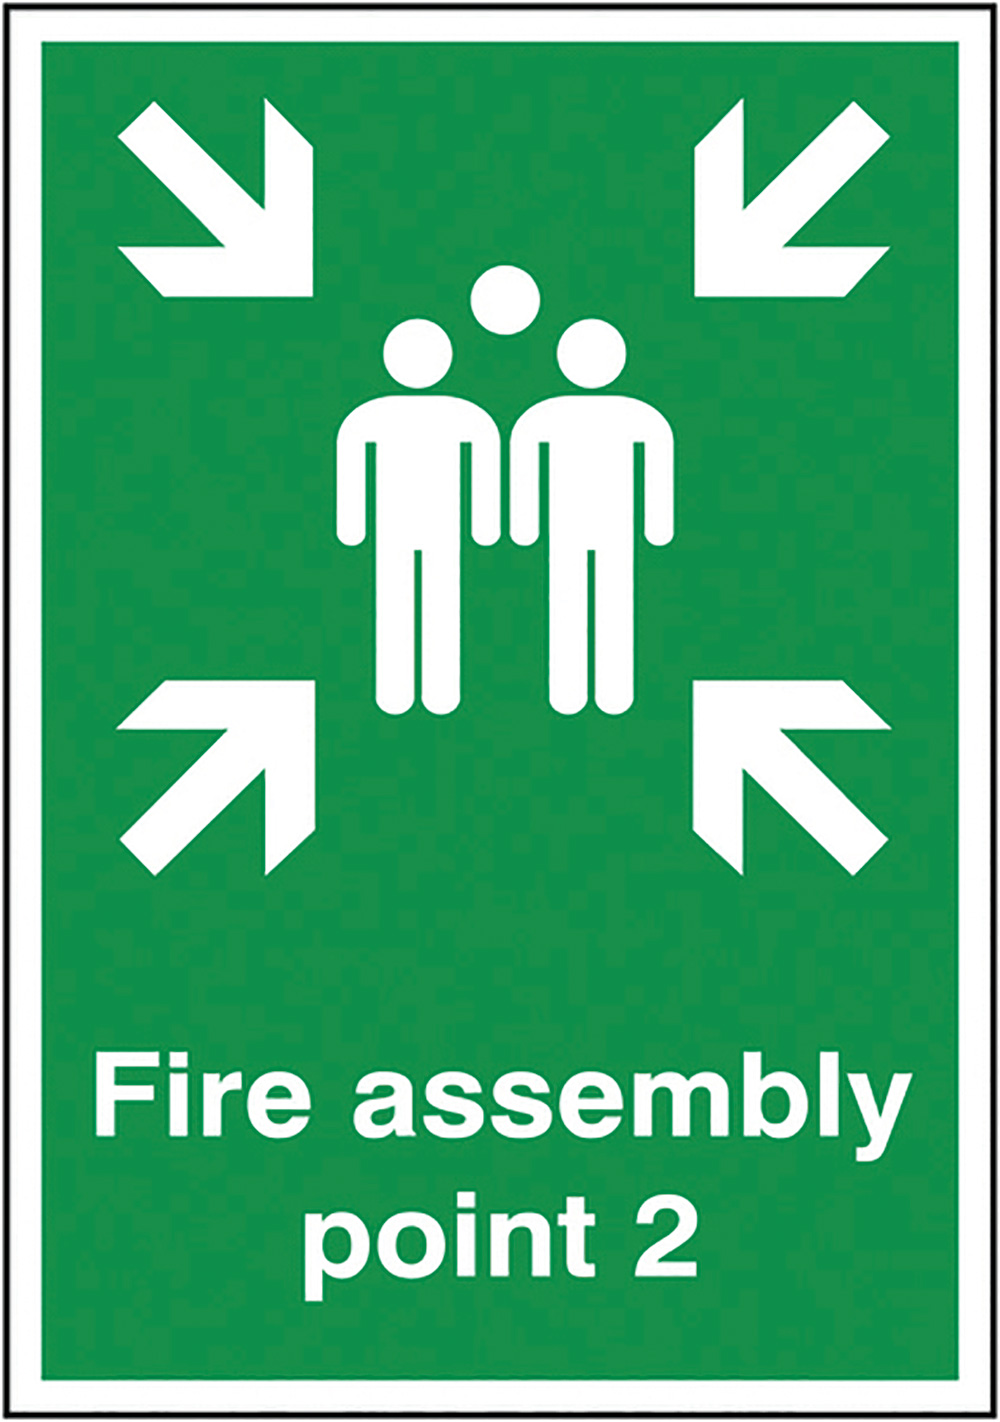 Fire Assembly Point 2  297x210mm Self Adhesive Vinyl Safety Sign  